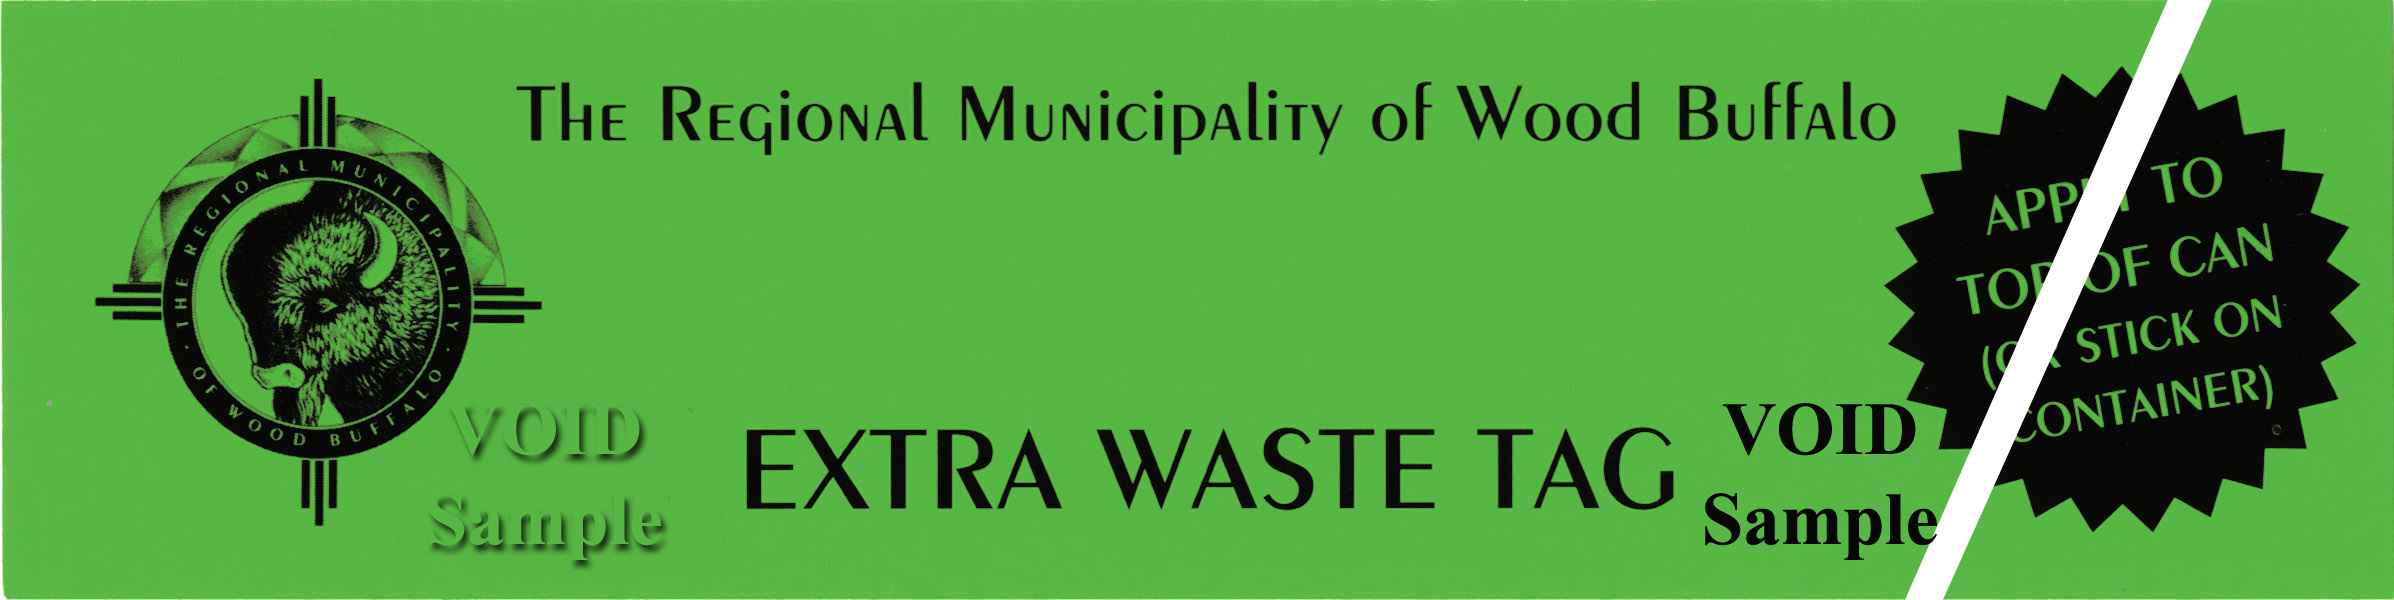 Garbage Bag Tag for extra bag from the Regional Municipality of Wood Buffalo, AB